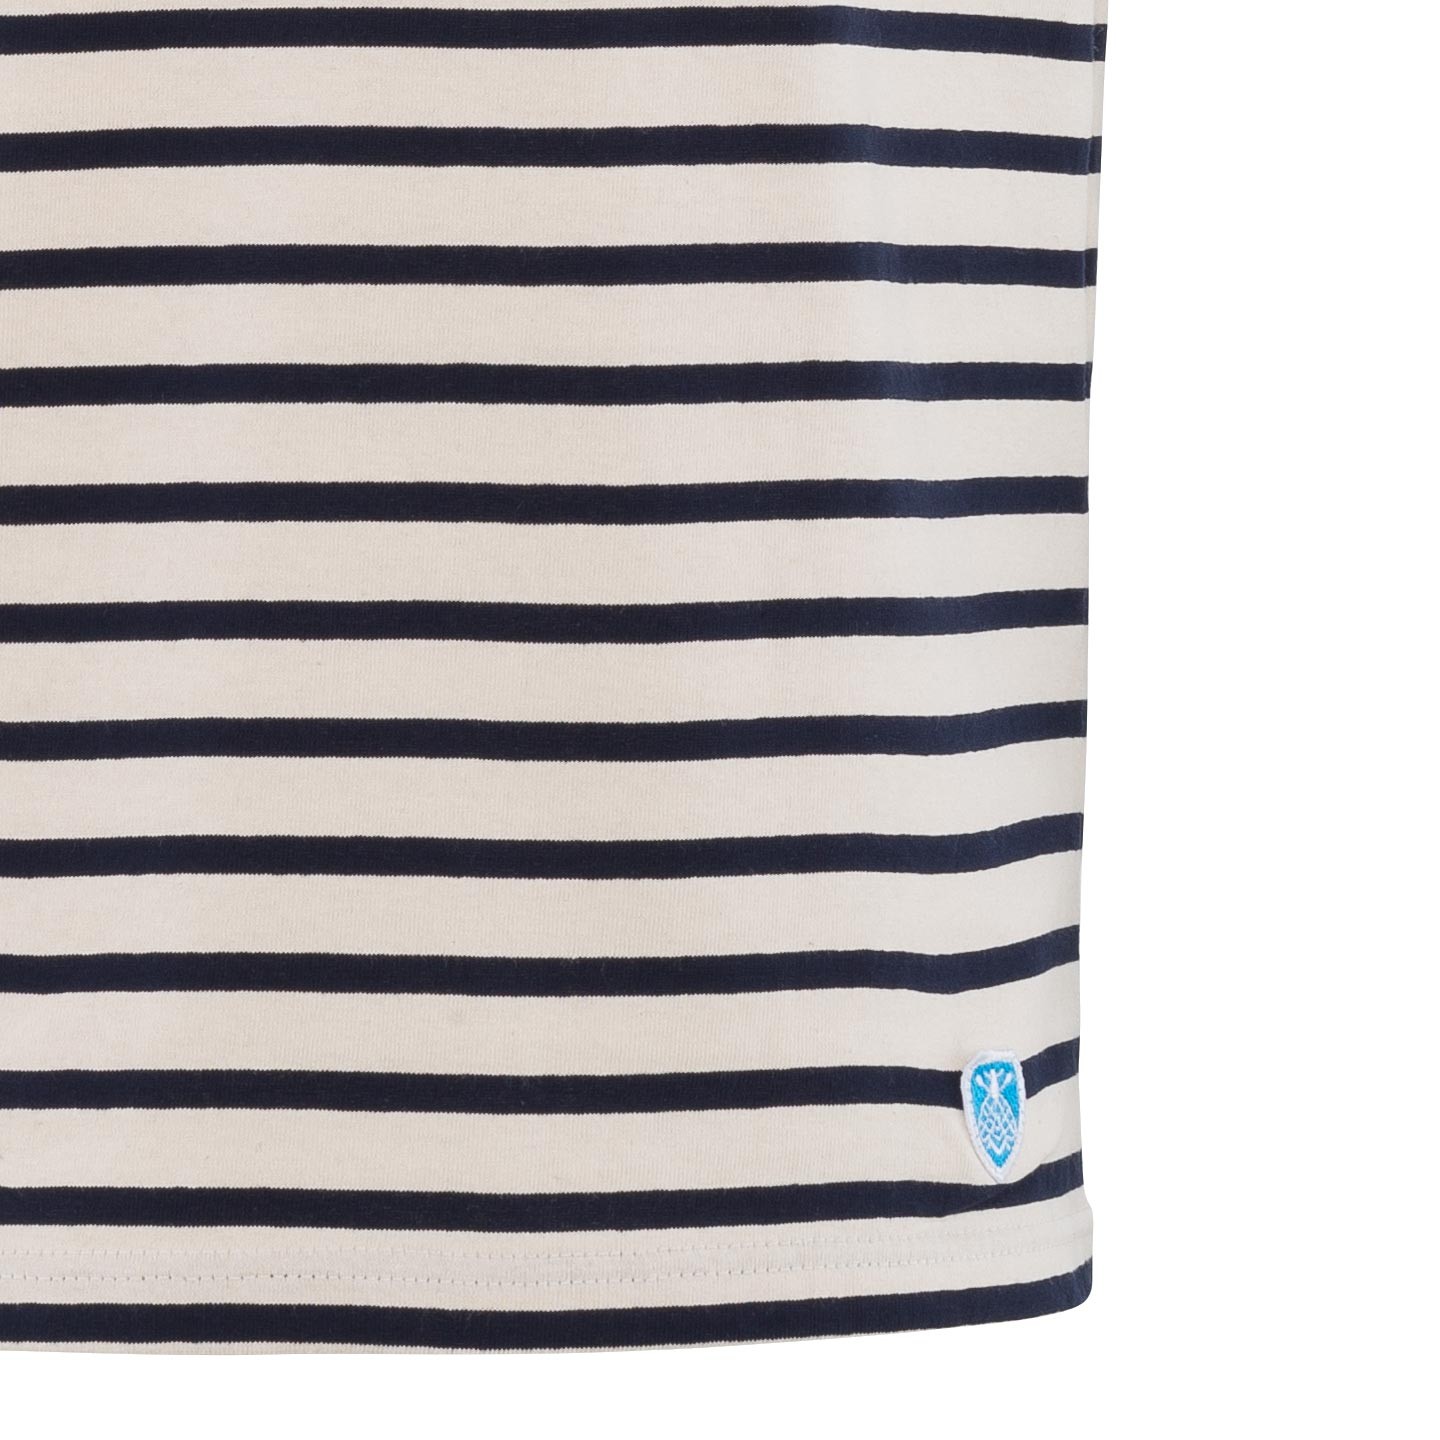 Striped shirt Ecru / Navy short sleeves, unisex made in France Orcival